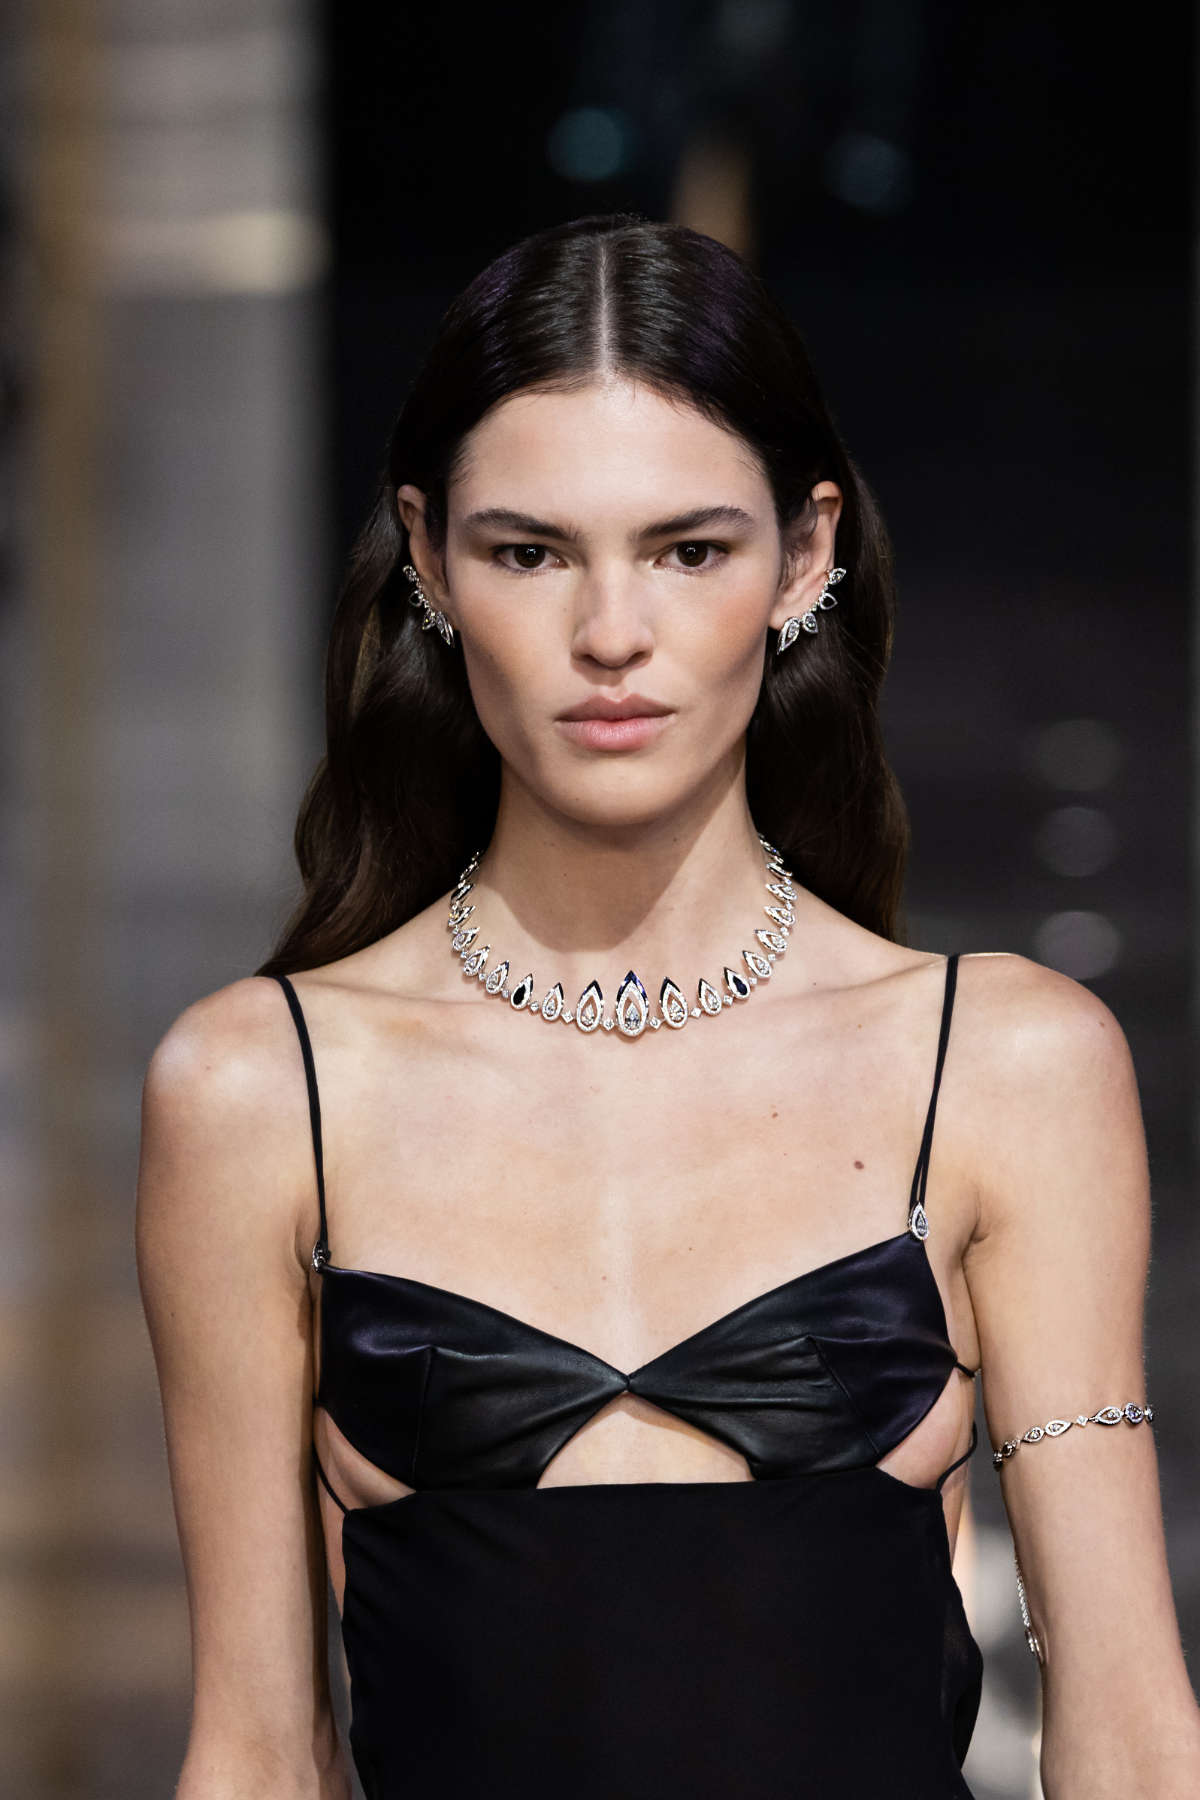 The Messika High Jewelry Show Lights Up Paris Fashion Week